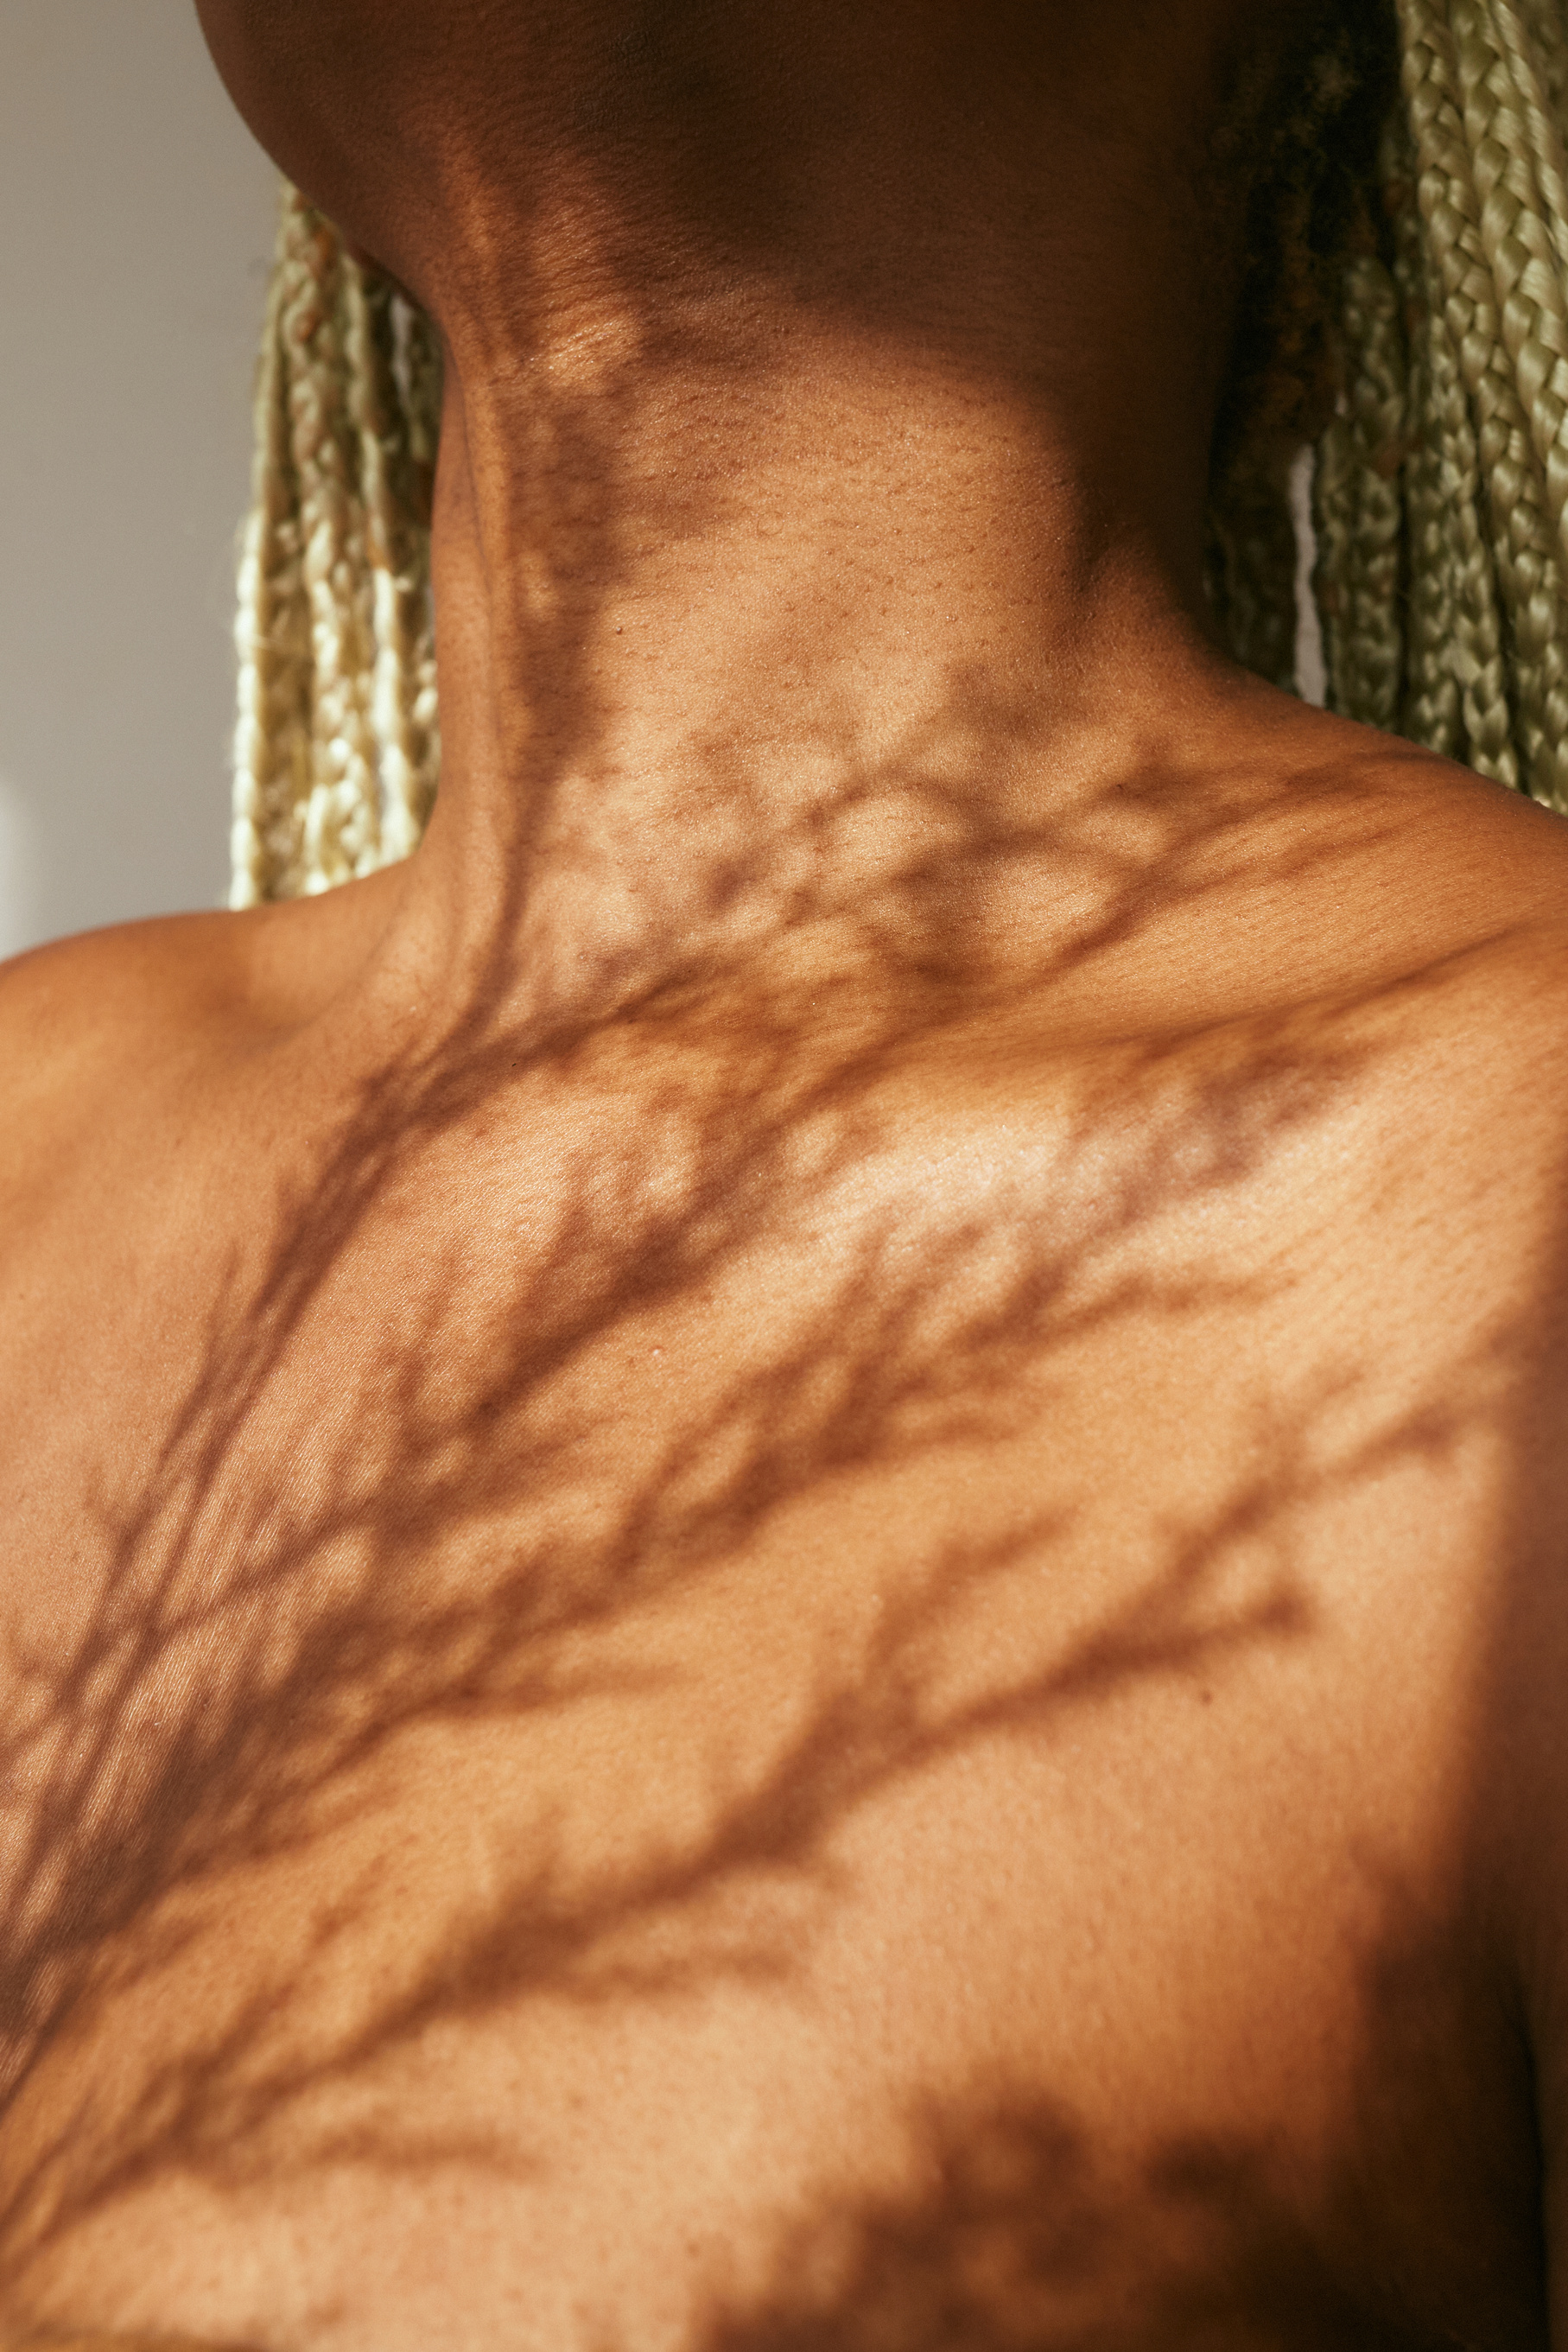 Shadow of Leaves on Woman's Body